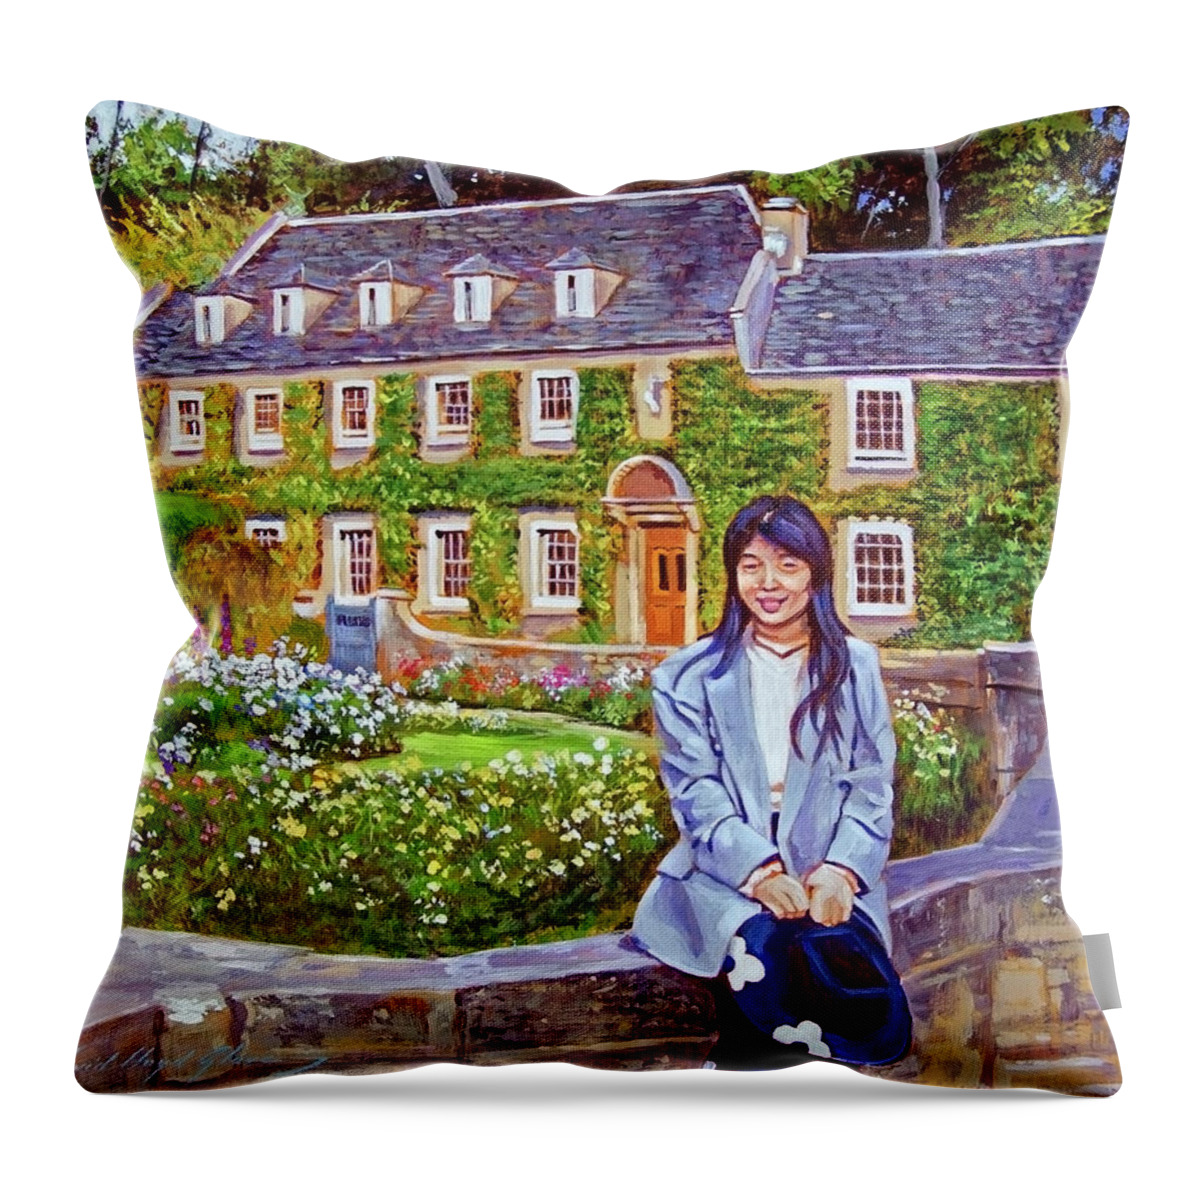 Landscape Throw Pillow featuring the painting The English Tourist by David Lloyd Glover